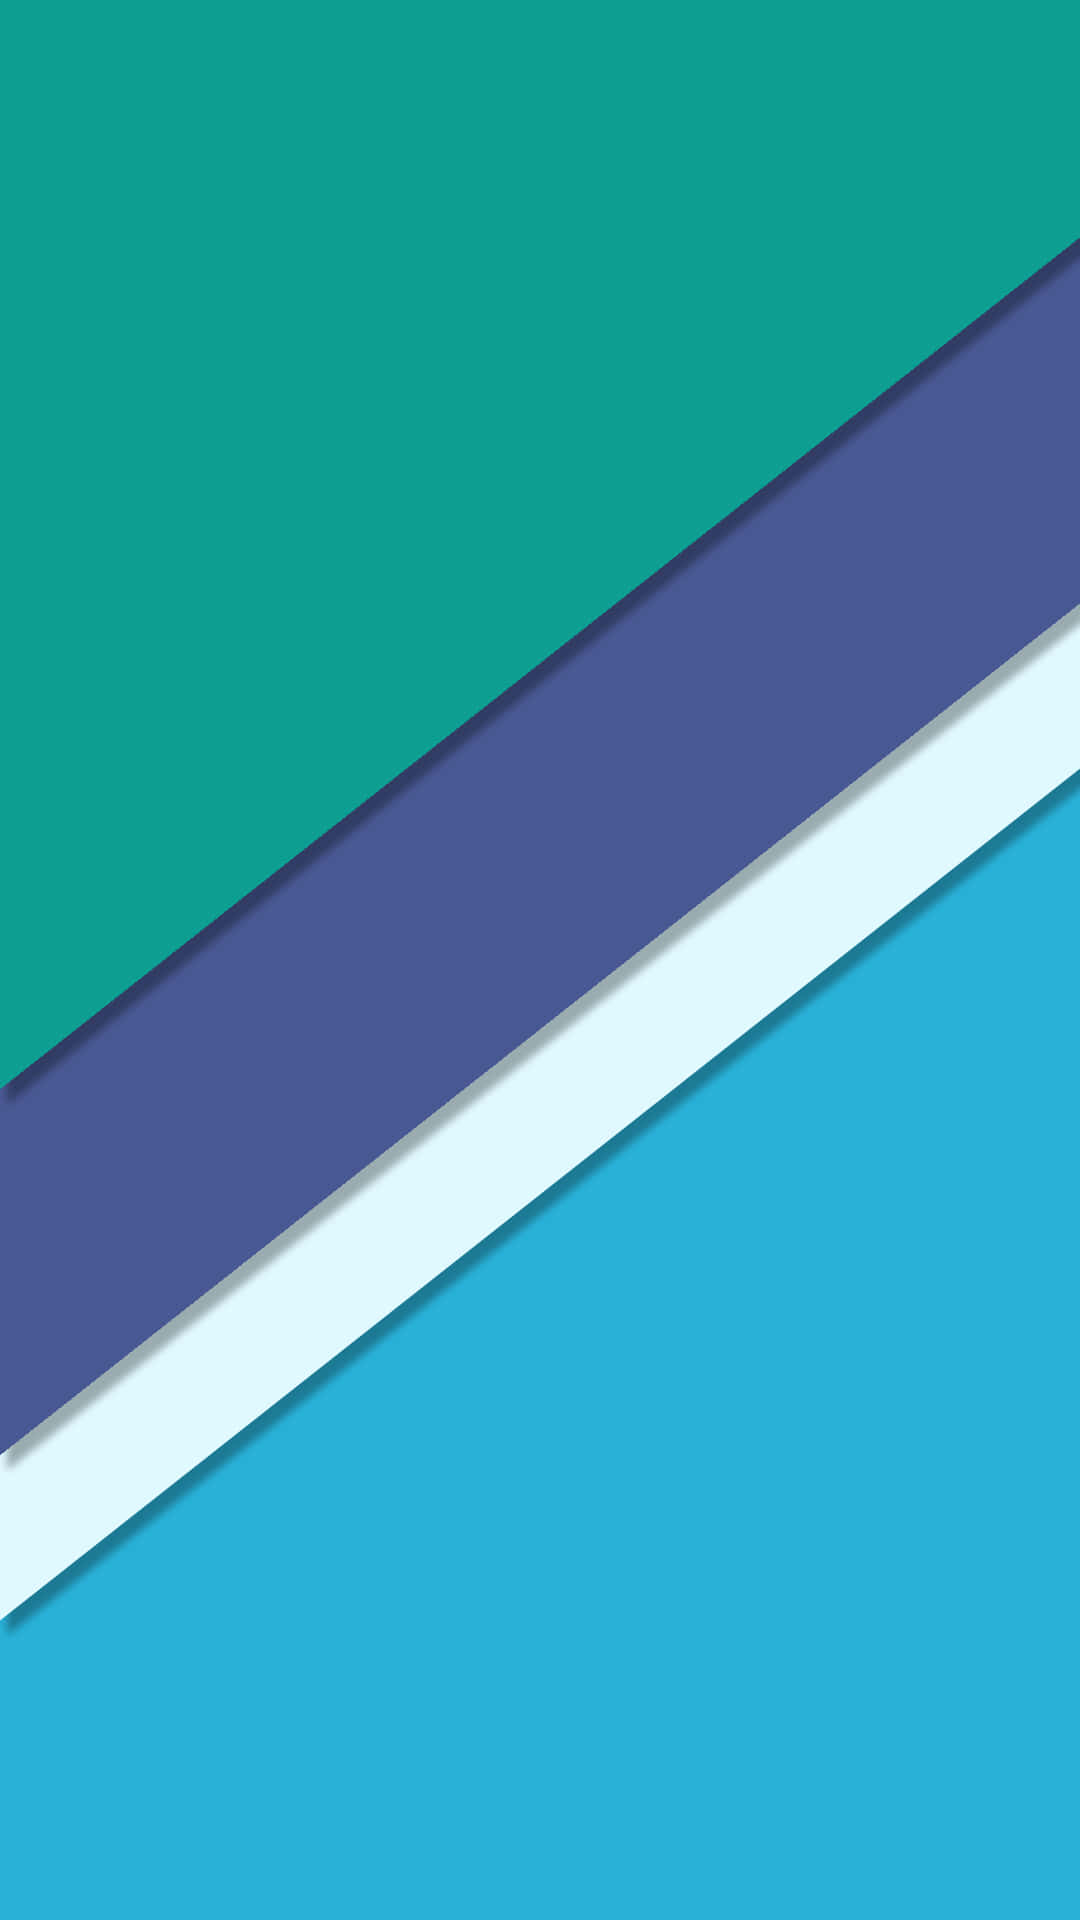 Iphone X Material Background Green Blue Purple Background